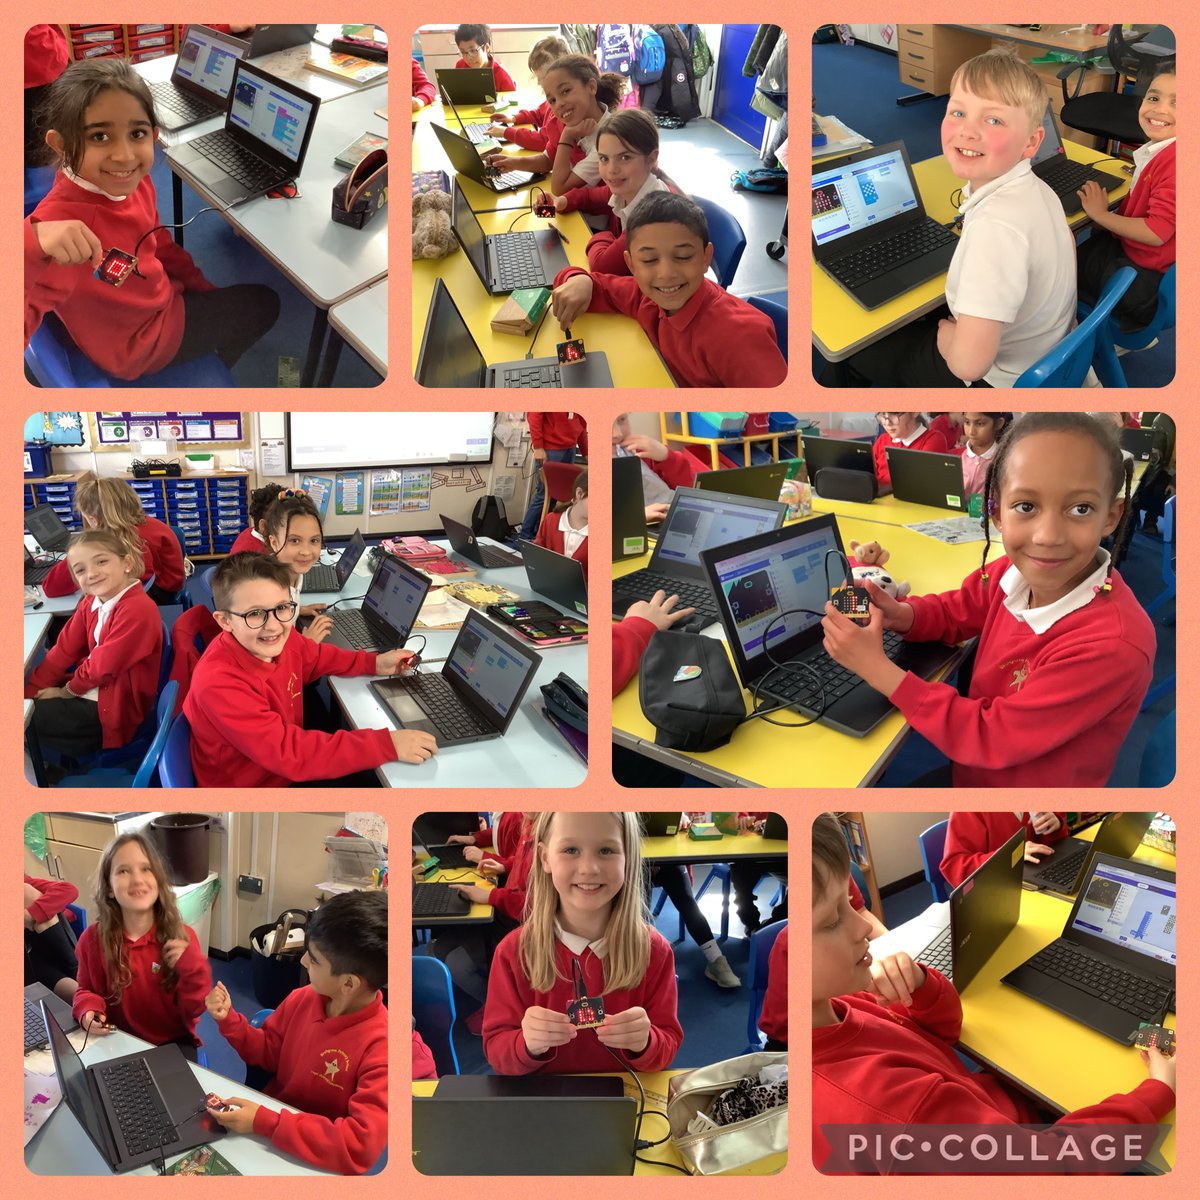 Blwyddyn 4 had two fun sessions with @Technocamps today, learning to programme micro:bits. Diolch! #birch24ST #birch24Y4